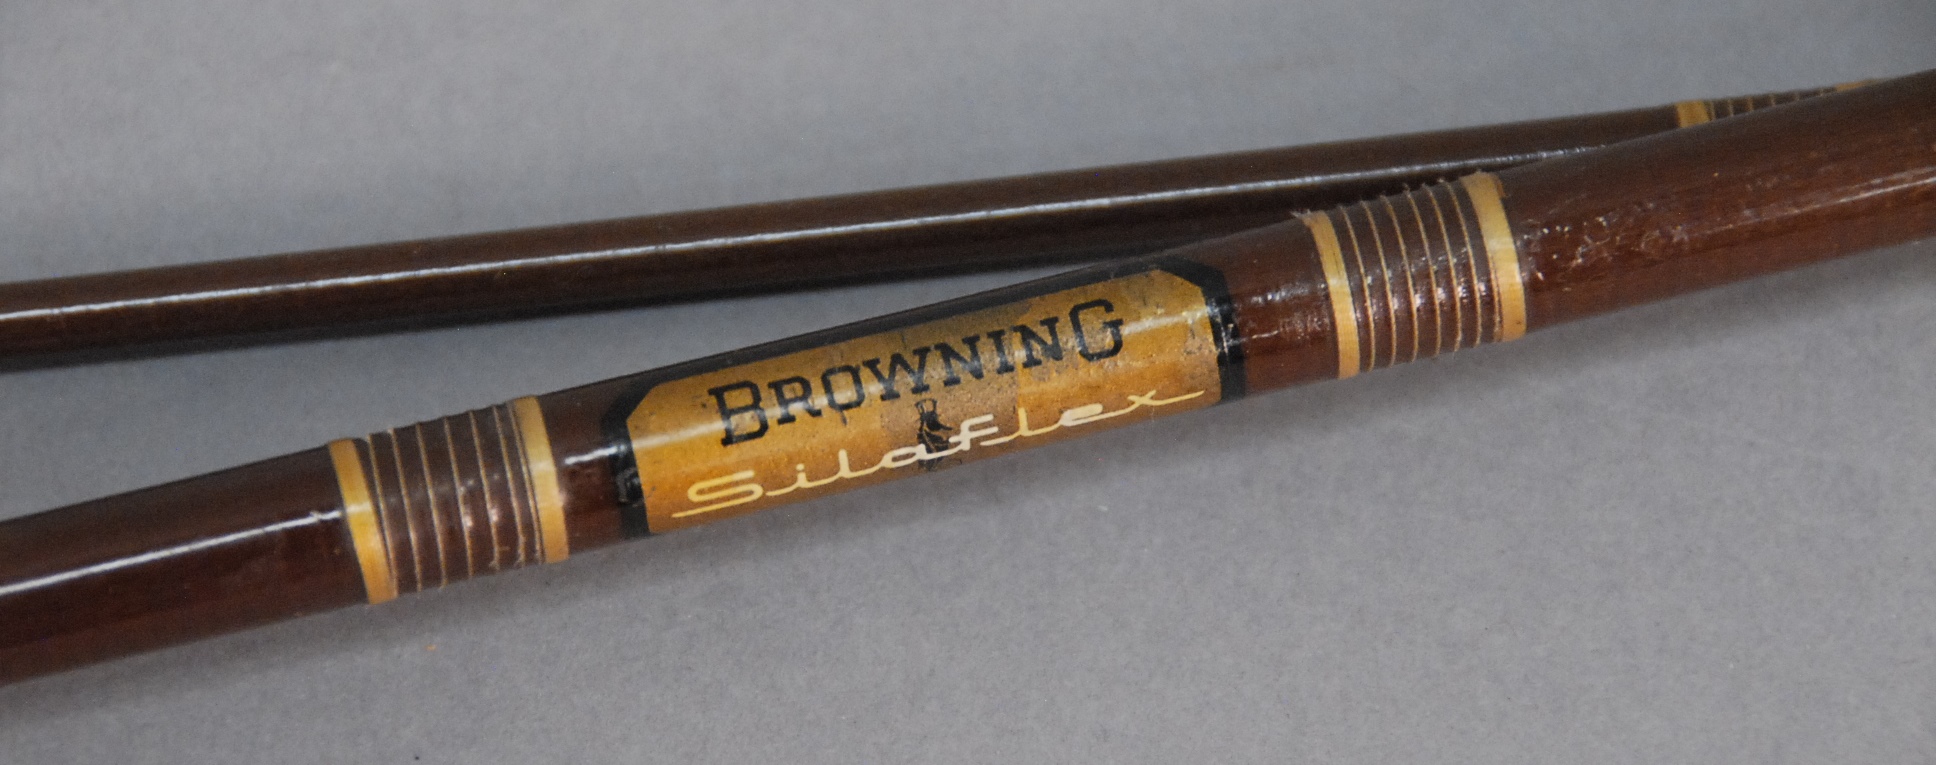 Lot 100: Vintage Browning silaflex two piece fly rod, model 222975